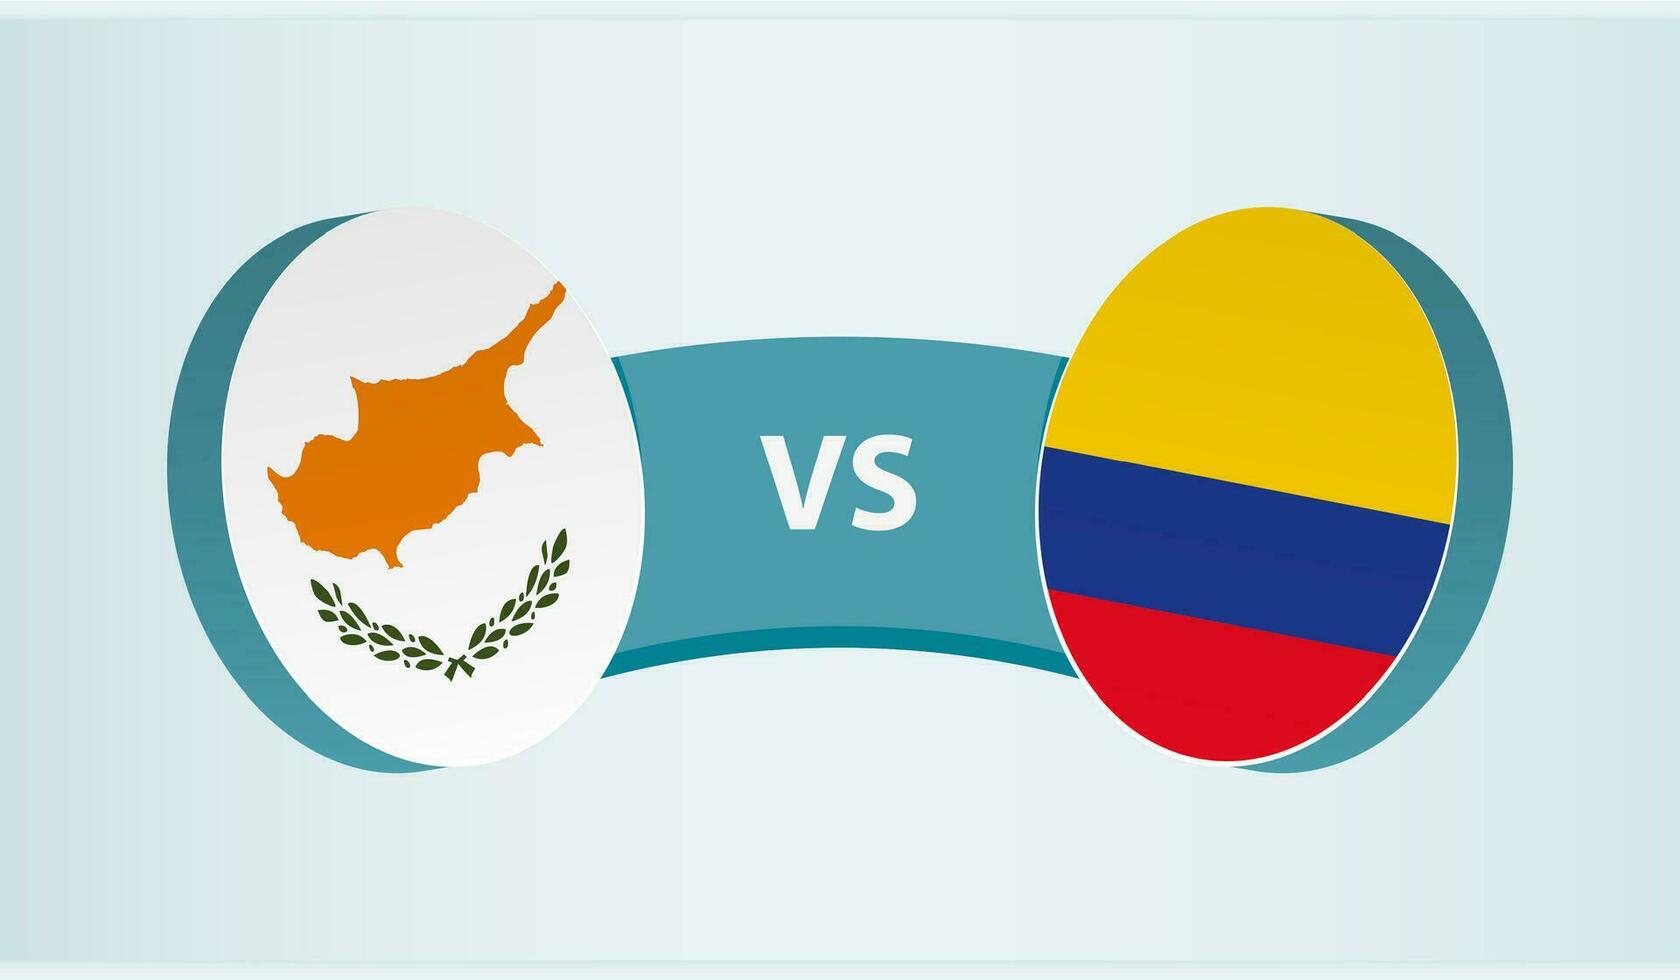 Cyprus versus Colombia, team sports competition concept. vector